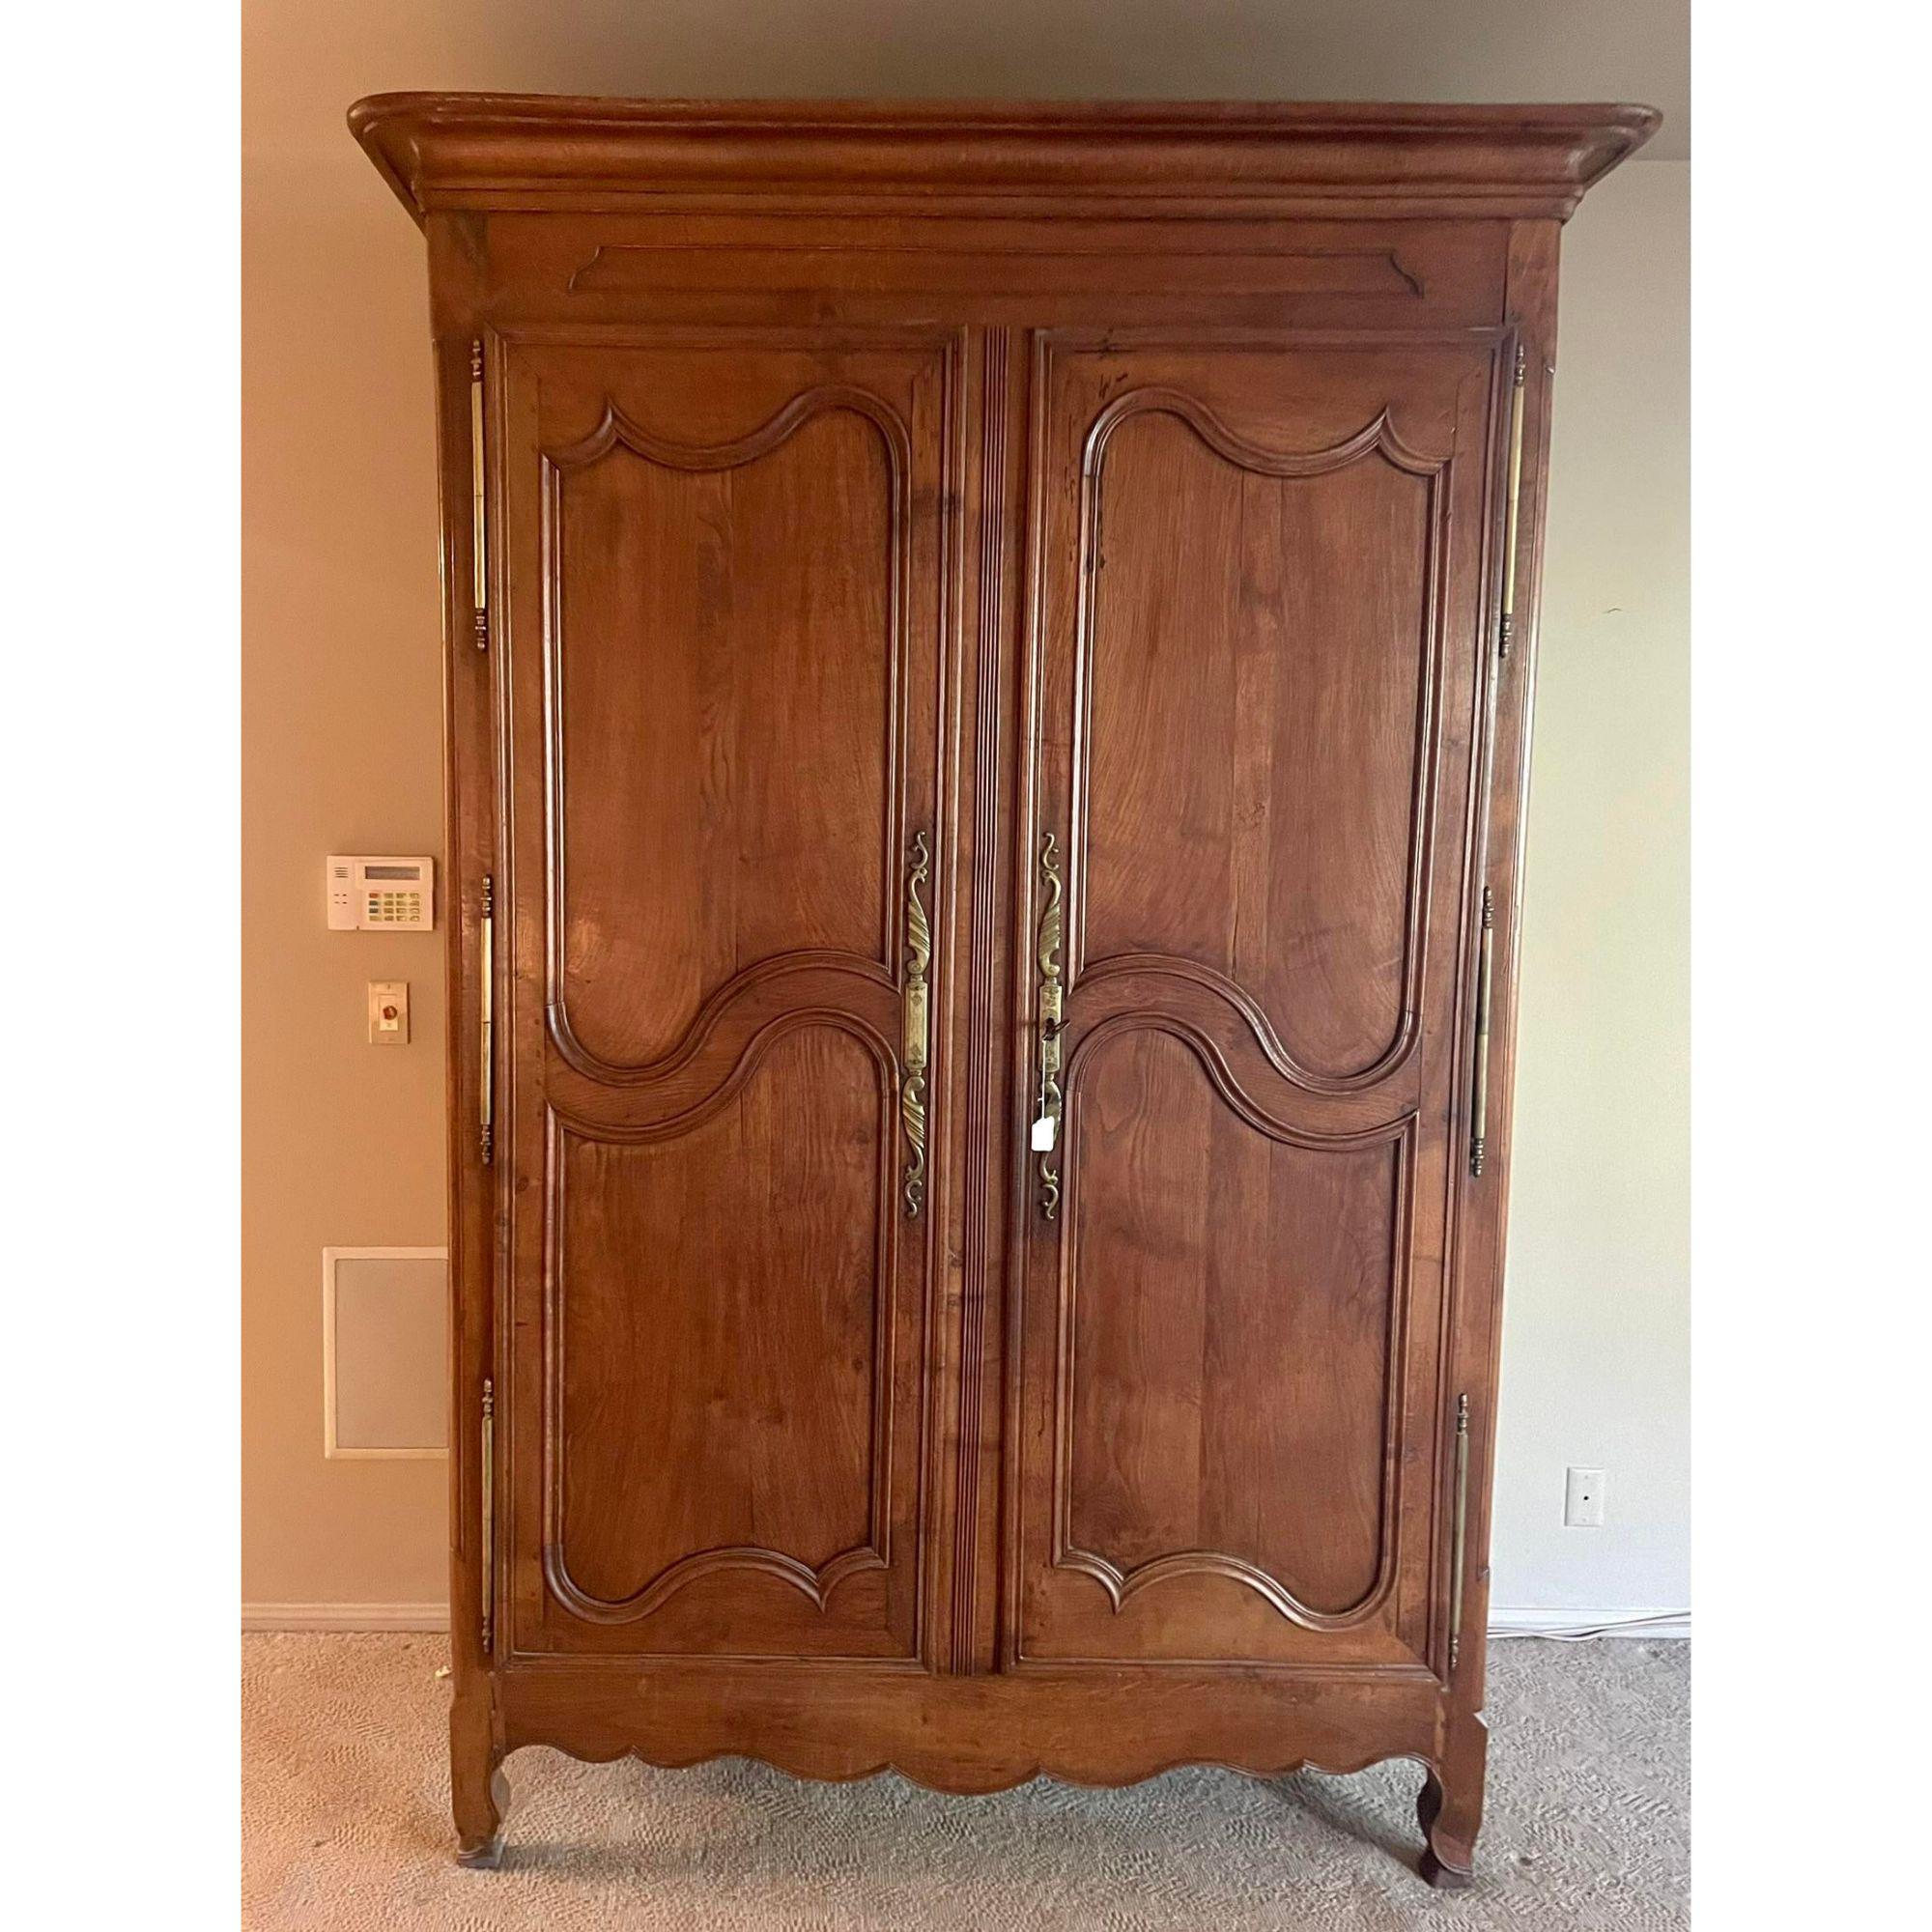 18th Century French Country Armoire Linen Press Wardrobe Cabinet. It features carved provincial details and a customized interior with tailored drawers. Includes original 18th century lock and key

Additional information: 
Materials: Fruitwood,